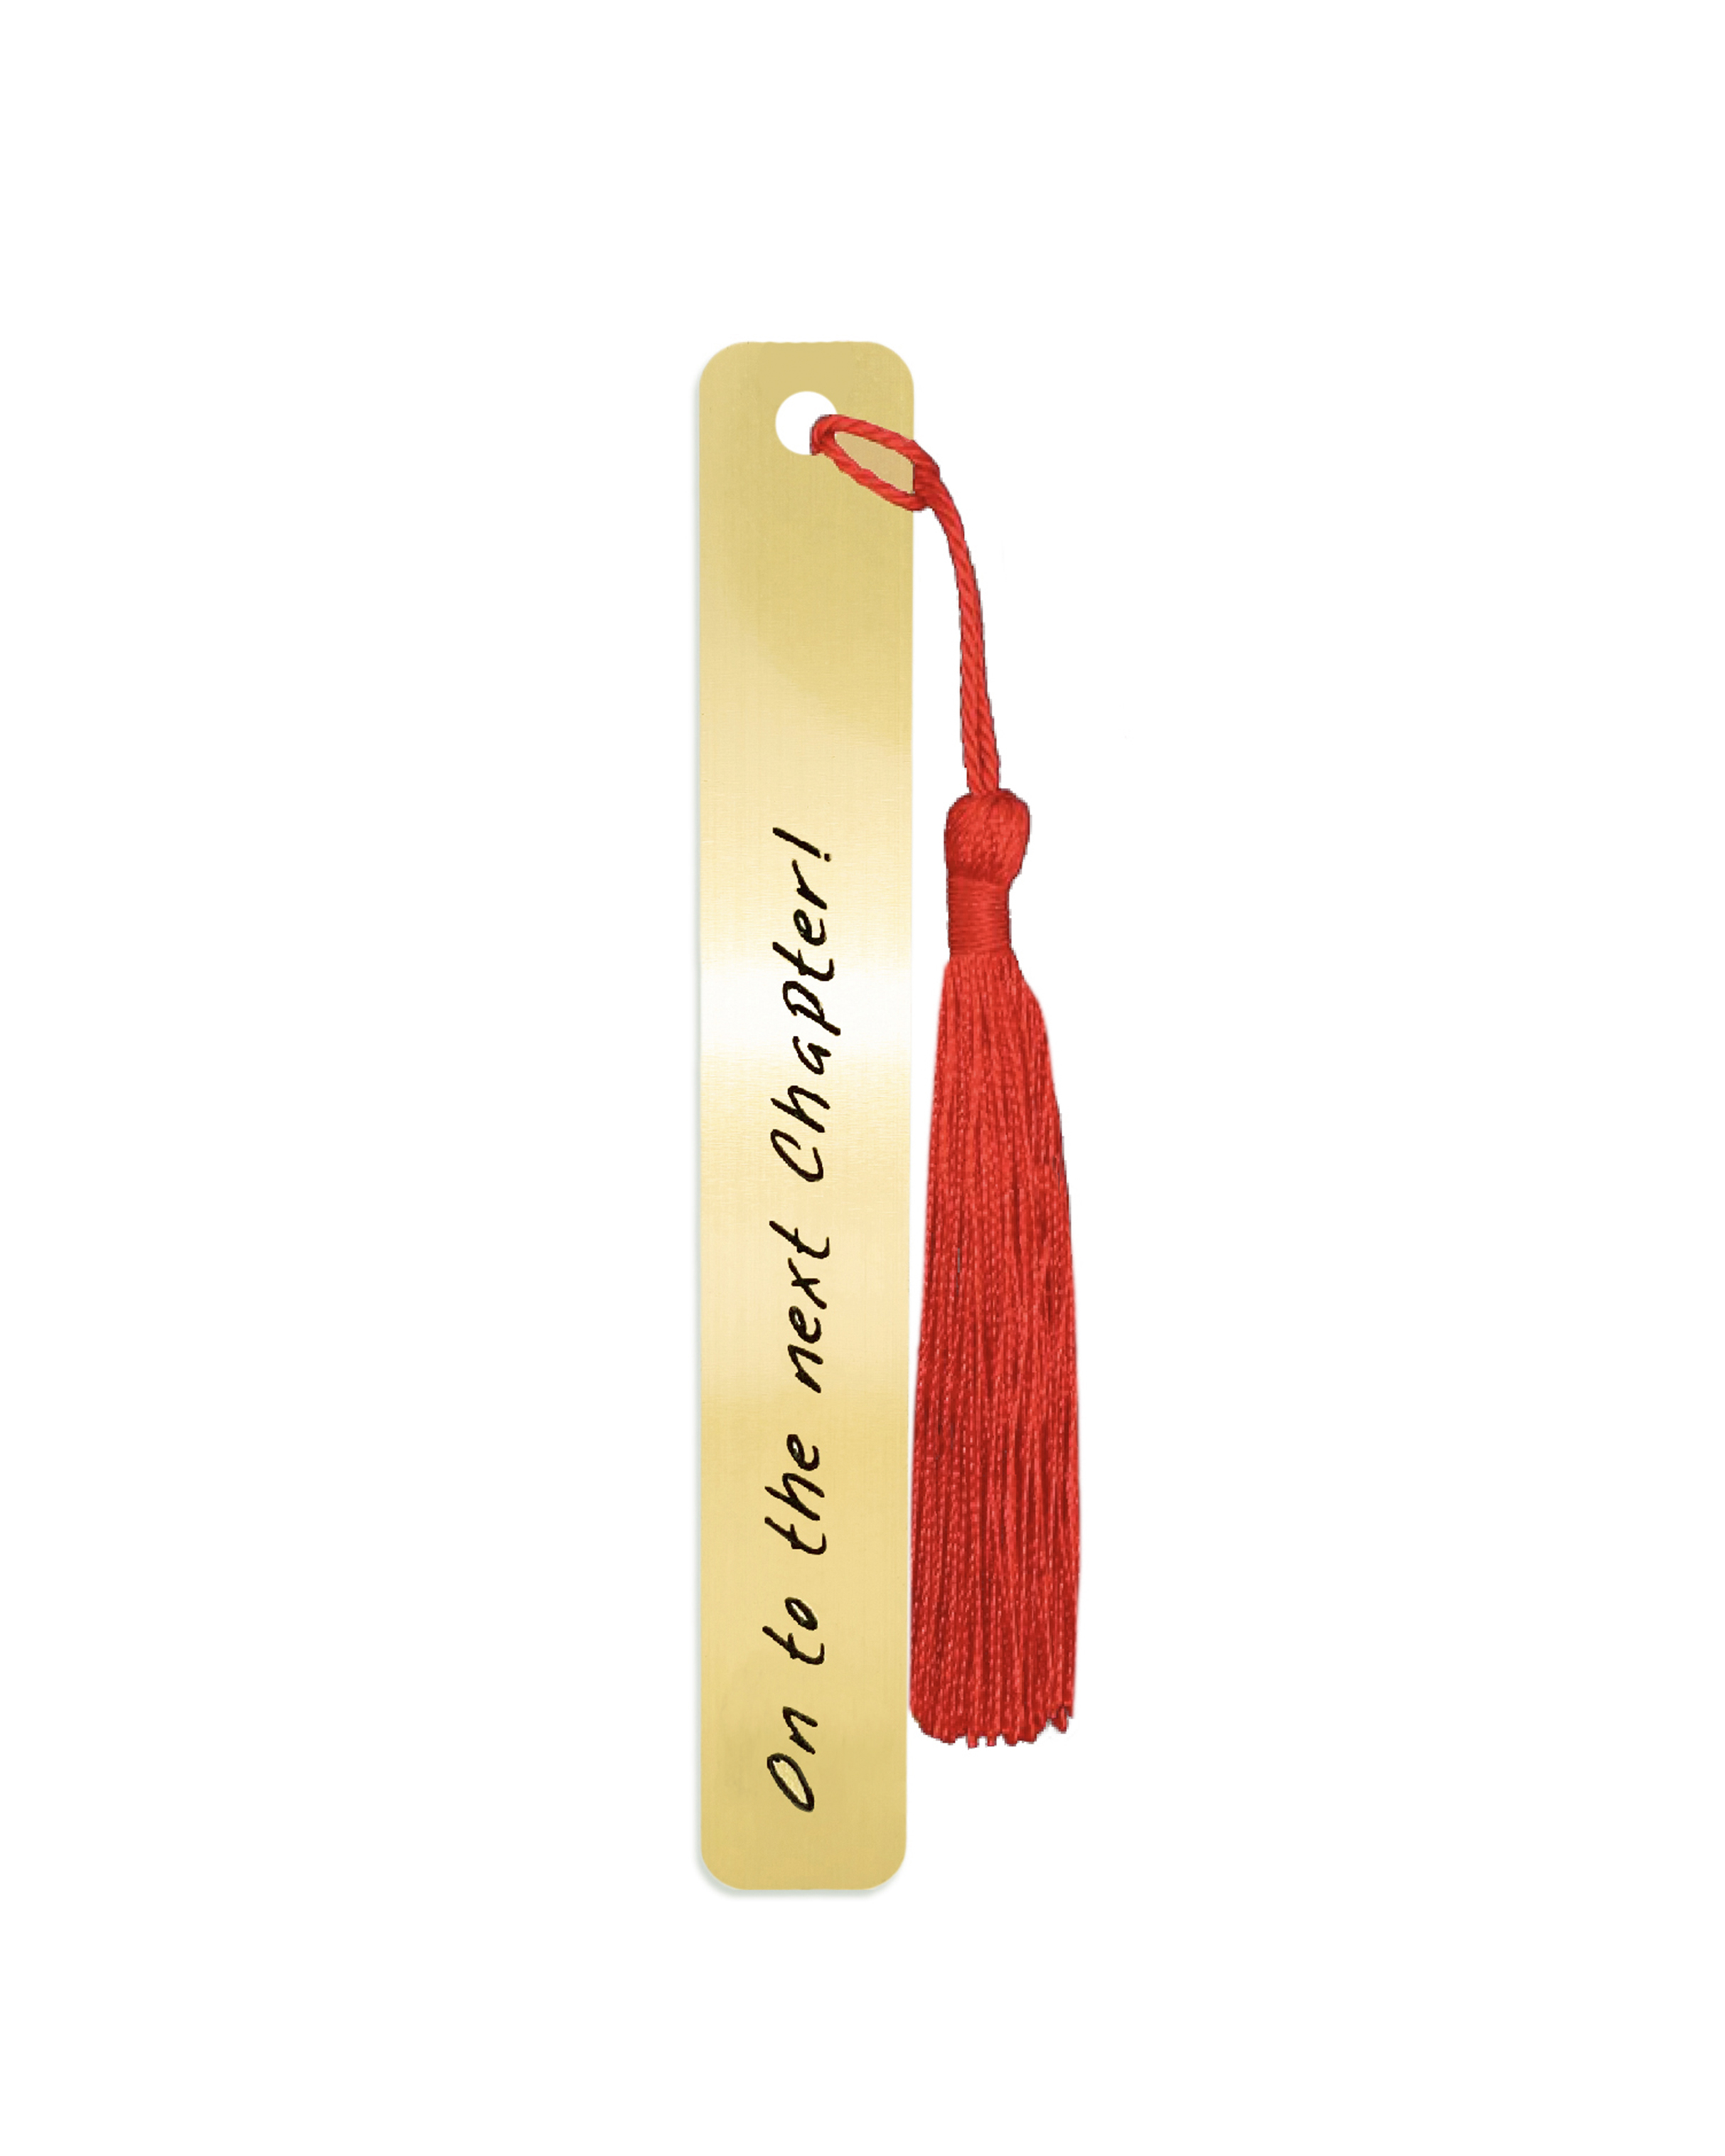 Next Chapter Gold Bookmark